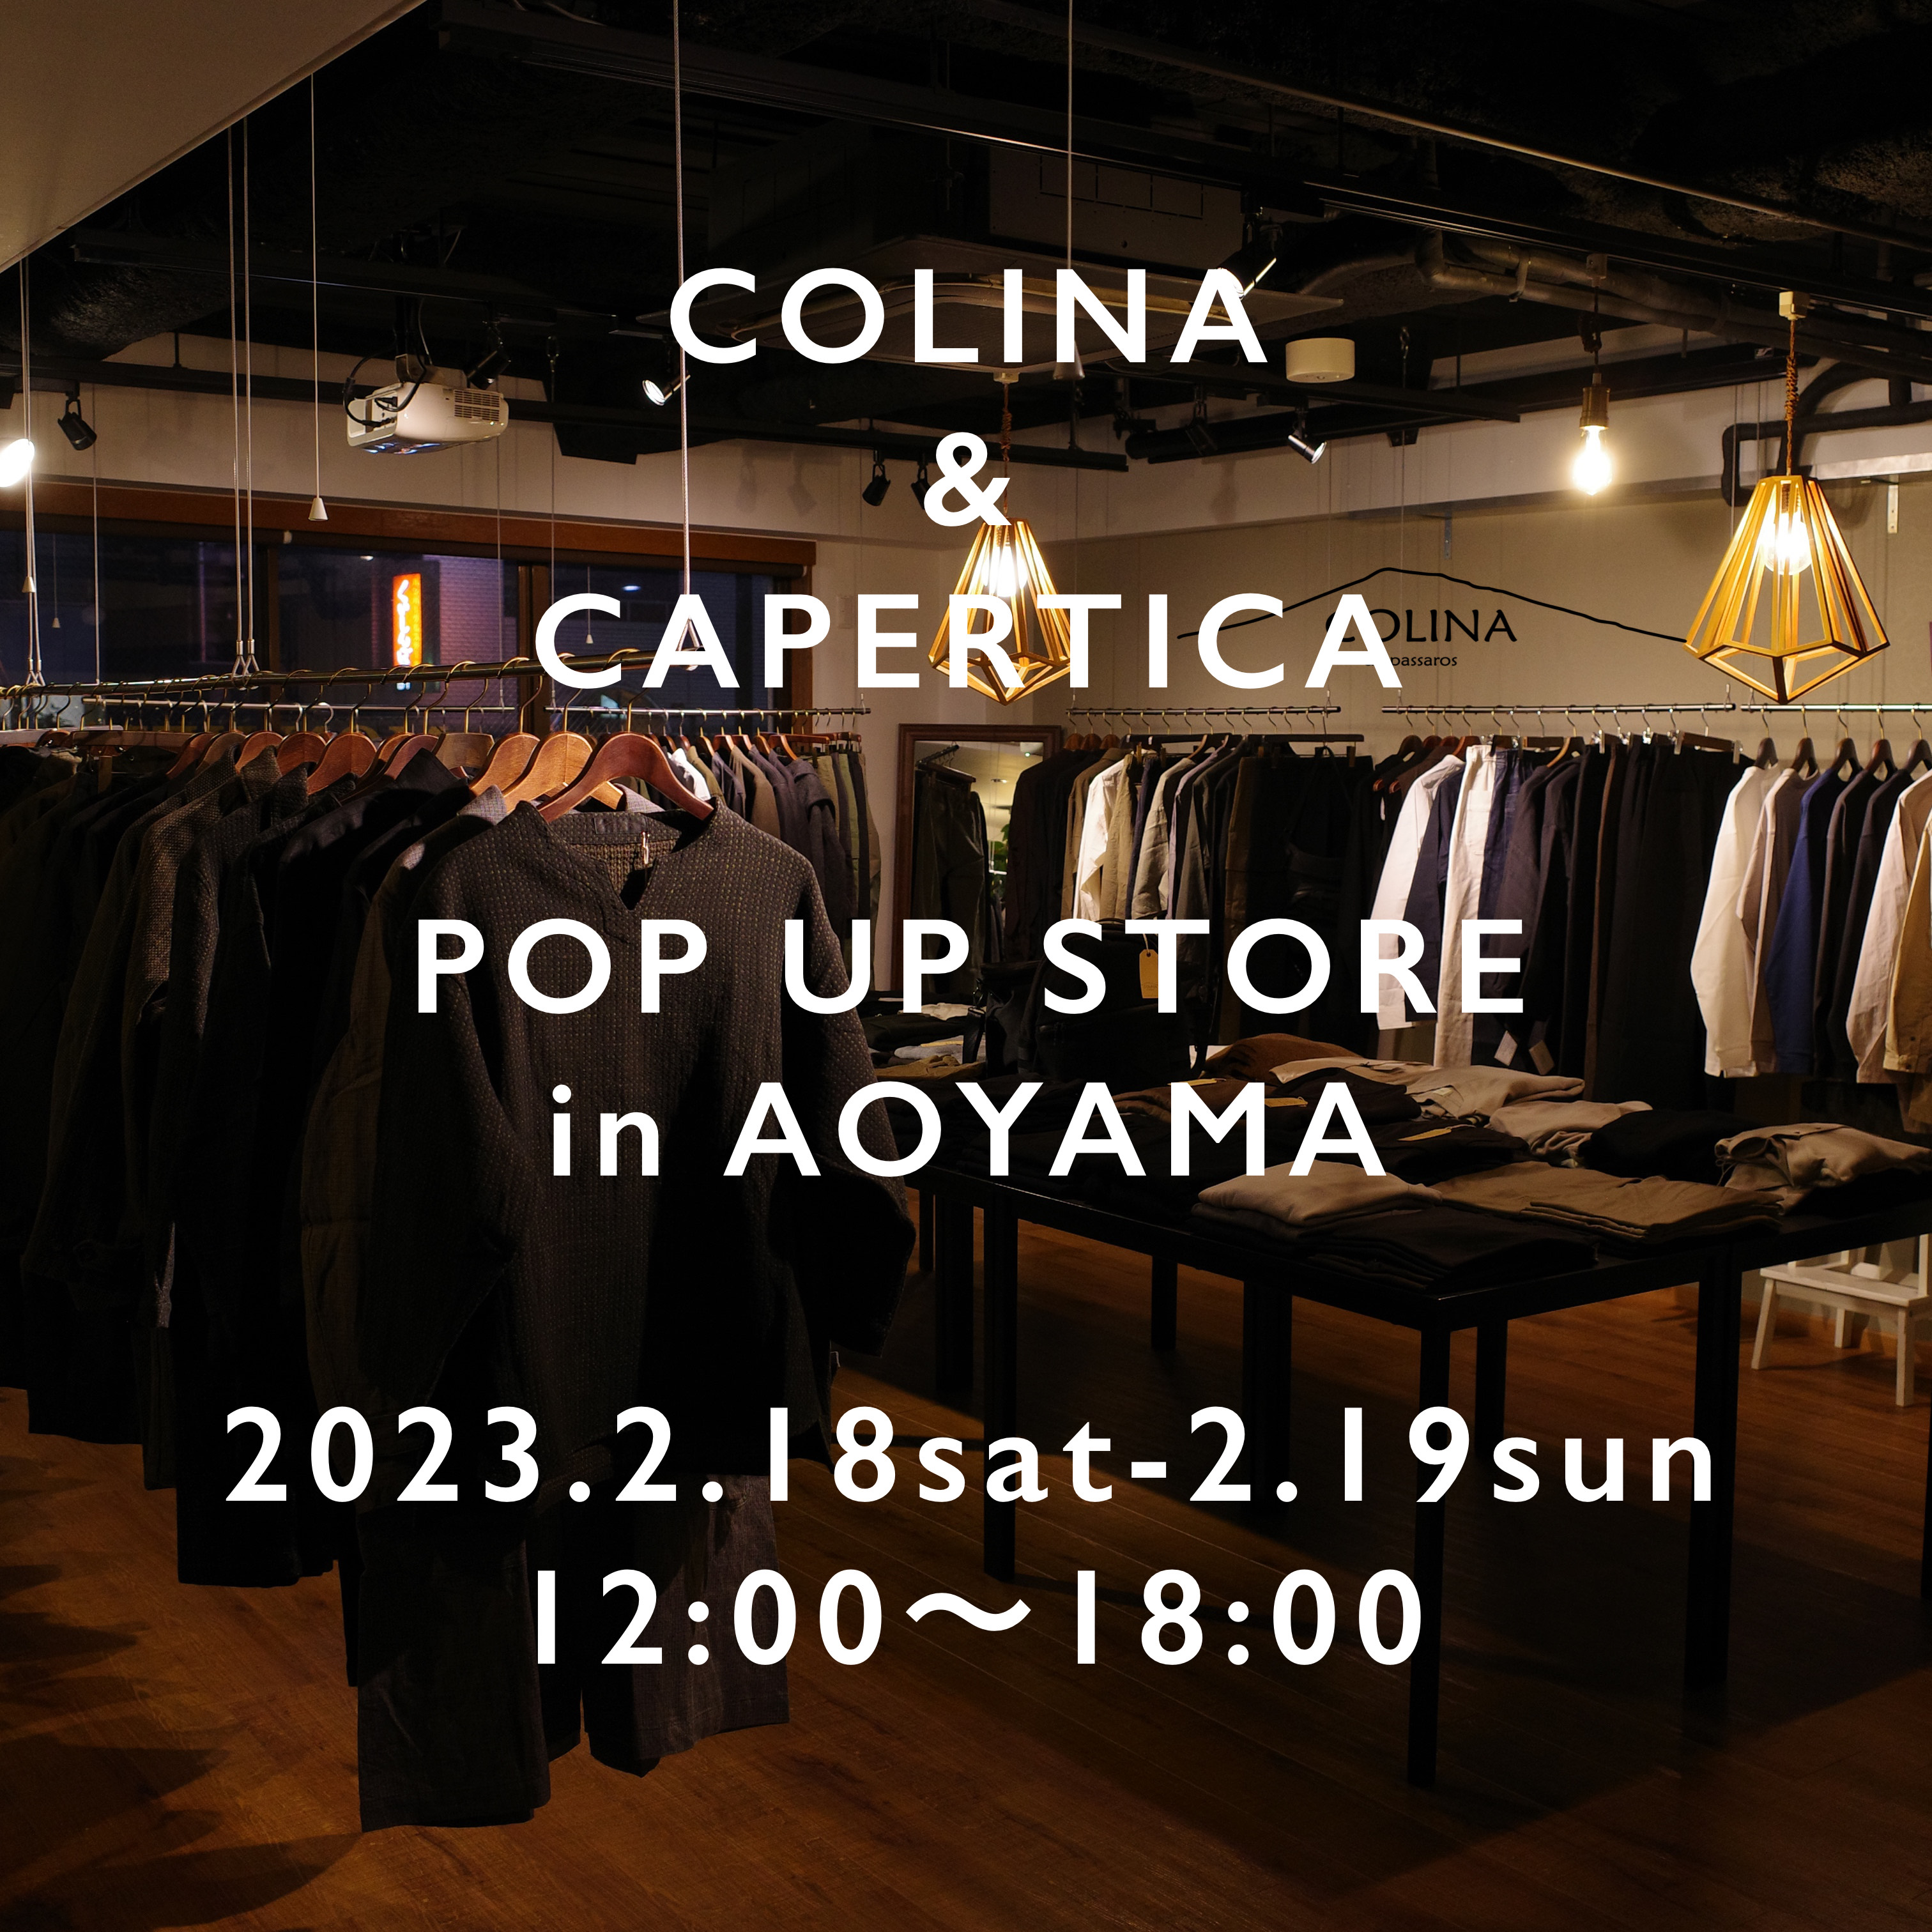 COLINA POP-UP STORE in AOYAMA  のお知らせ